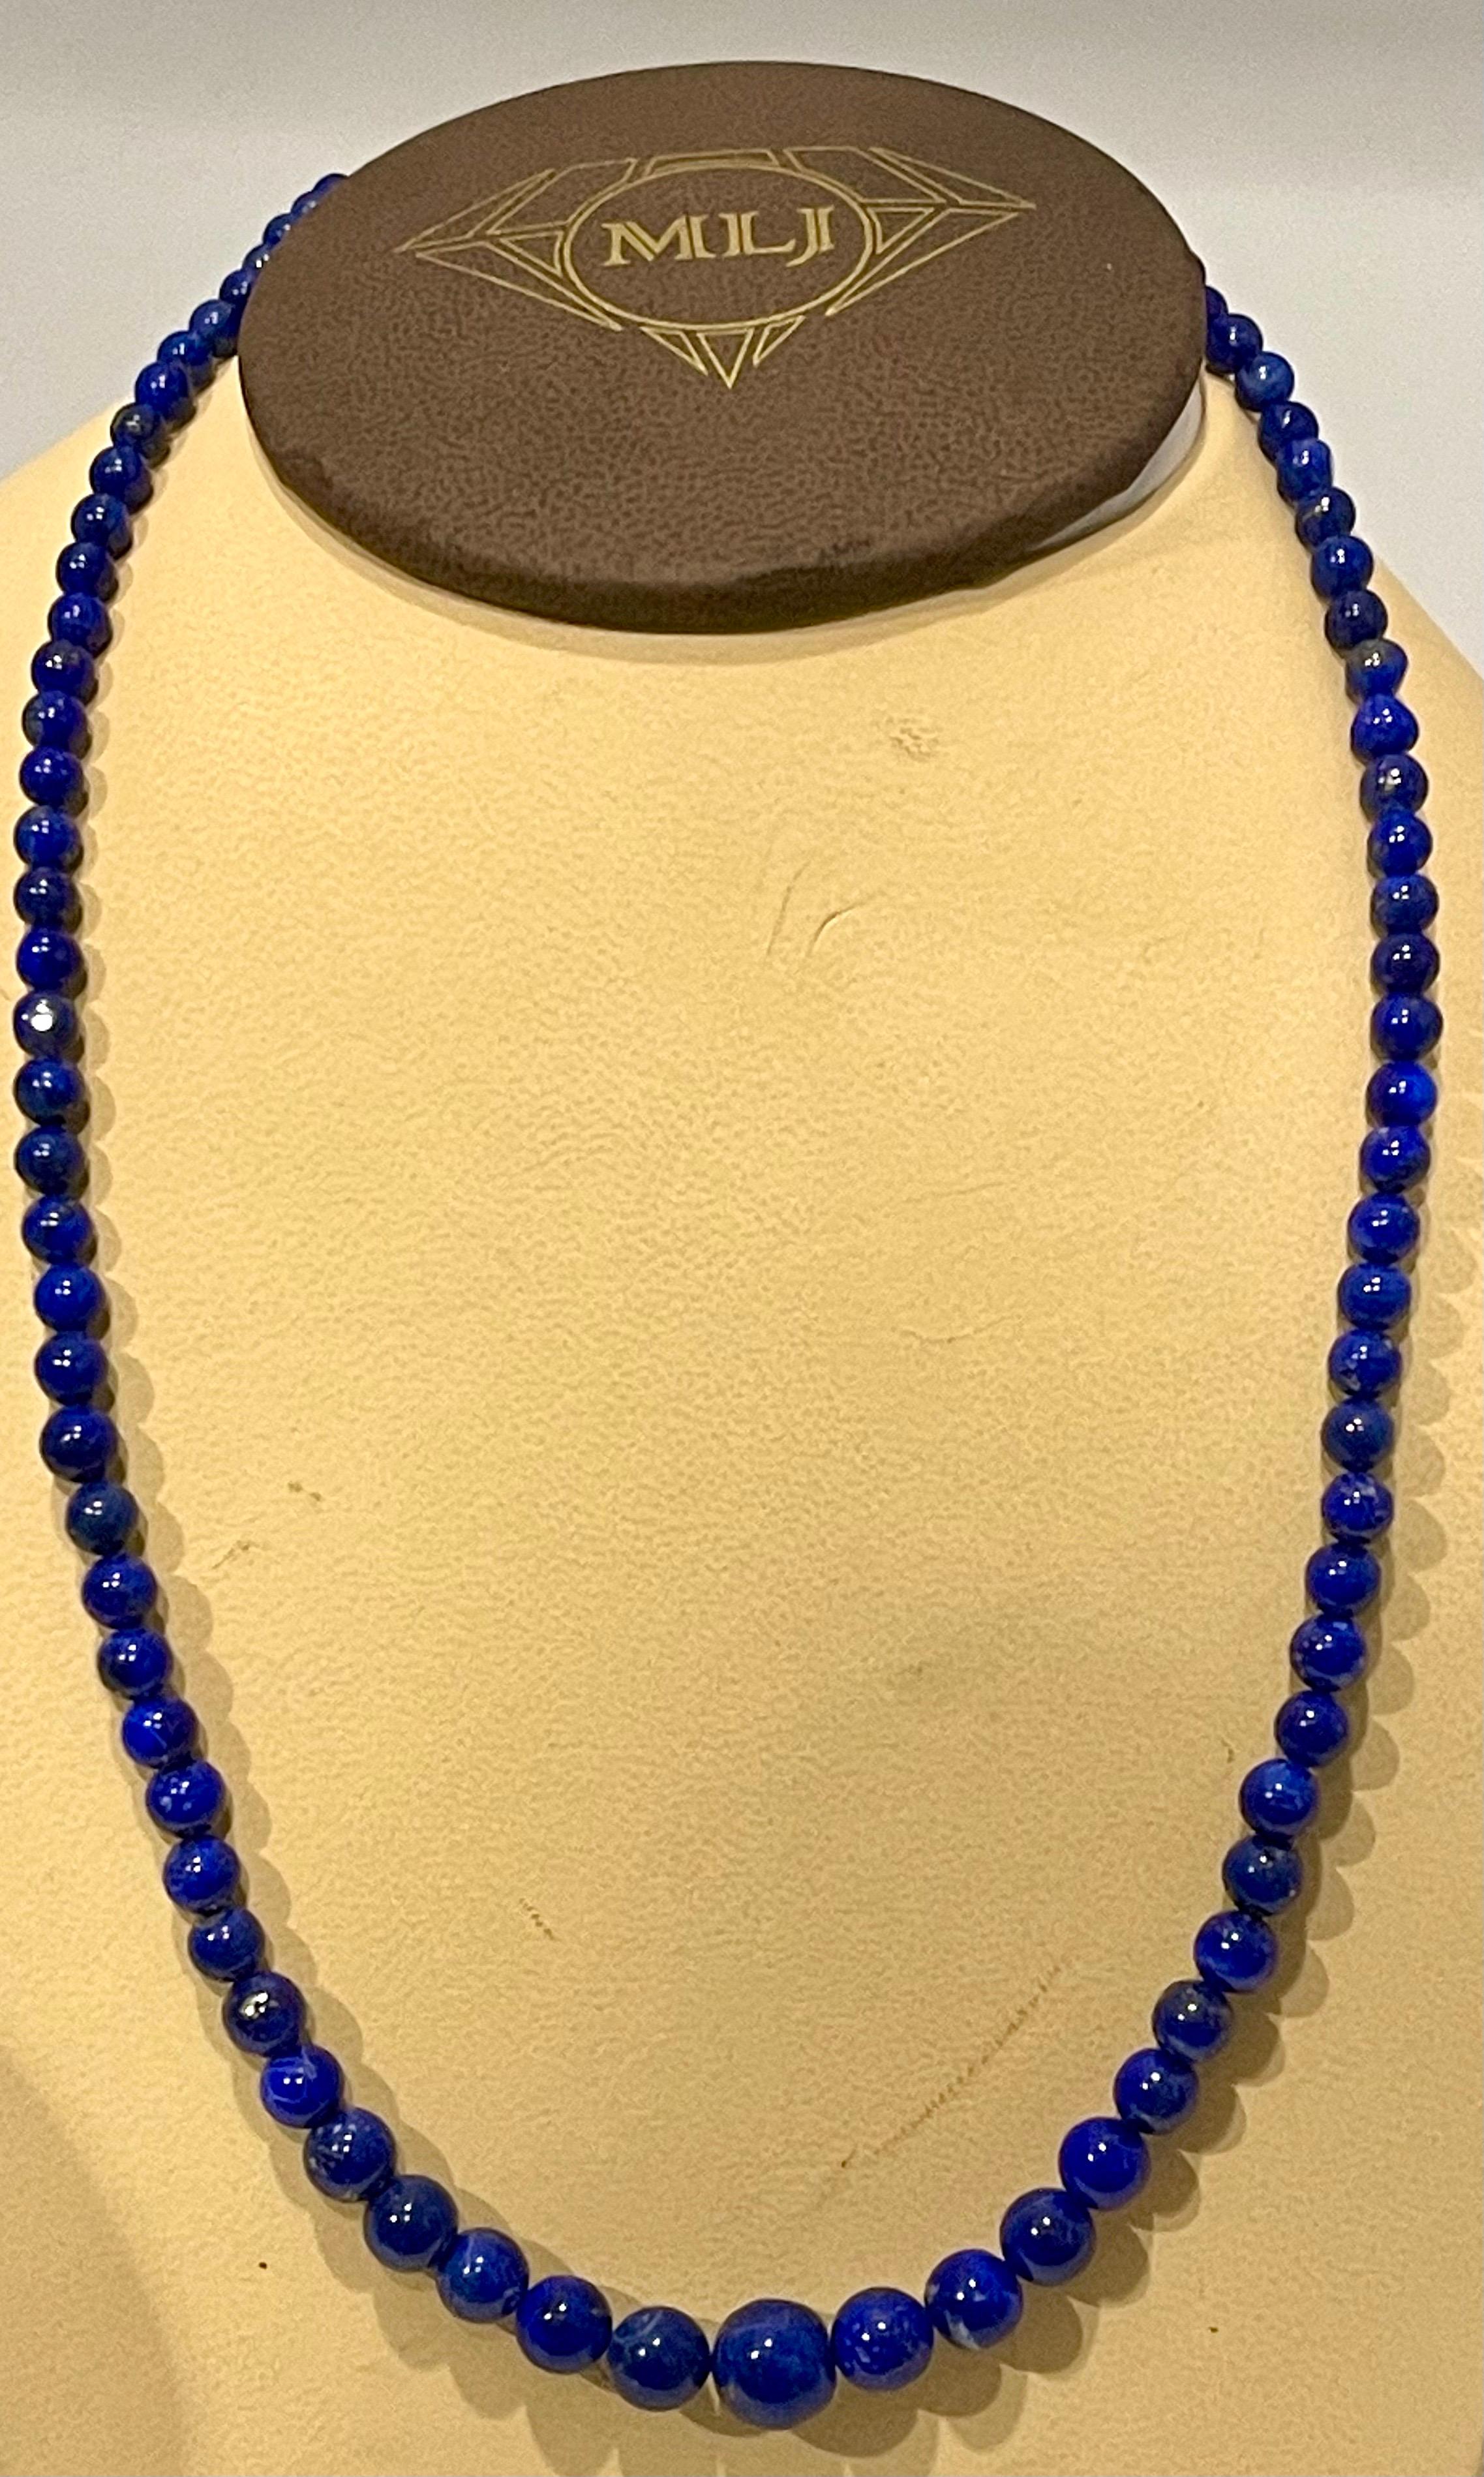 Vintage Lapis Lazuli Single Strand Necklace with 14 Karat Yellow Long Hook Clasp For Sale 8